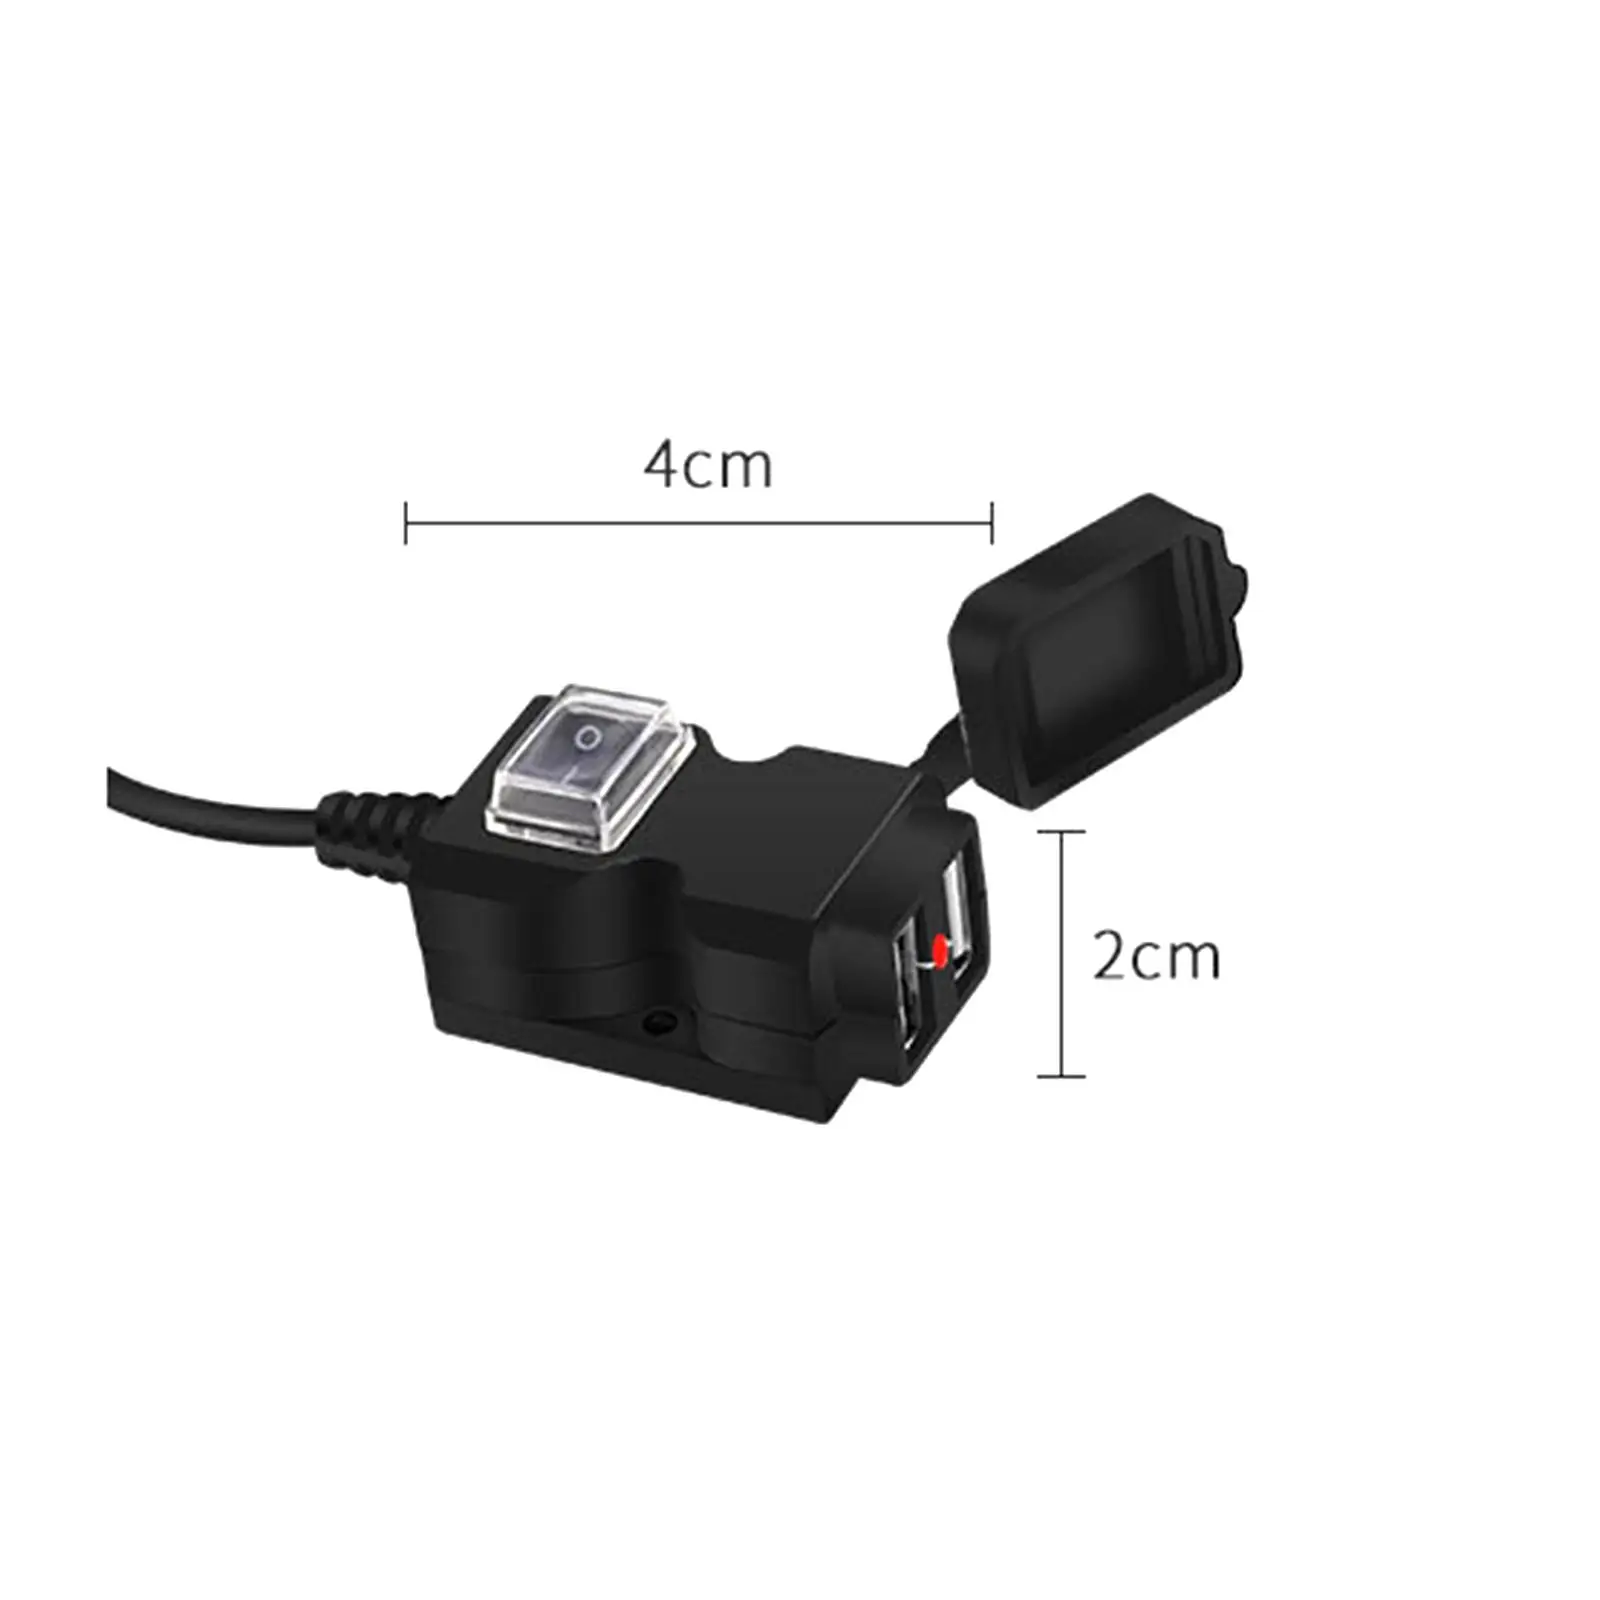 Motorcycle Mobile Phone Charger Dual USB Port Accessories with 1.5M Wire